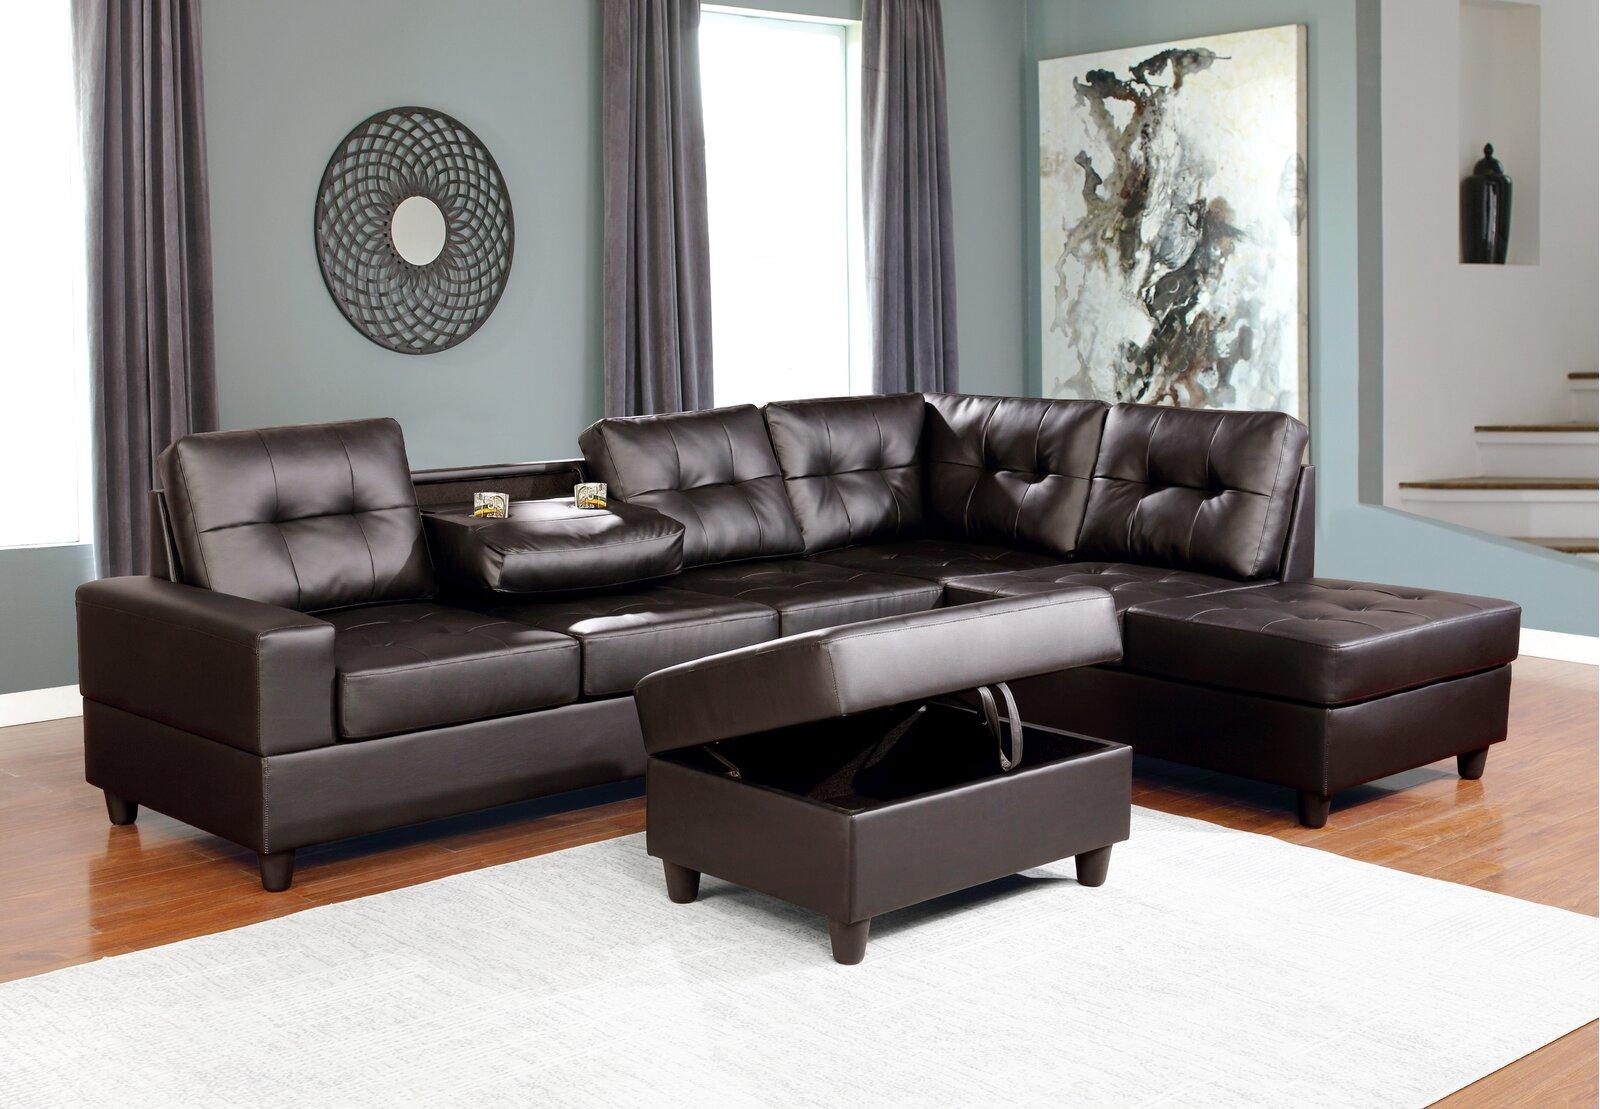 Contemporary, Modern Sectional Sofa BOSTON BOSTON-Sec-Brown in Brown Eco-Leather